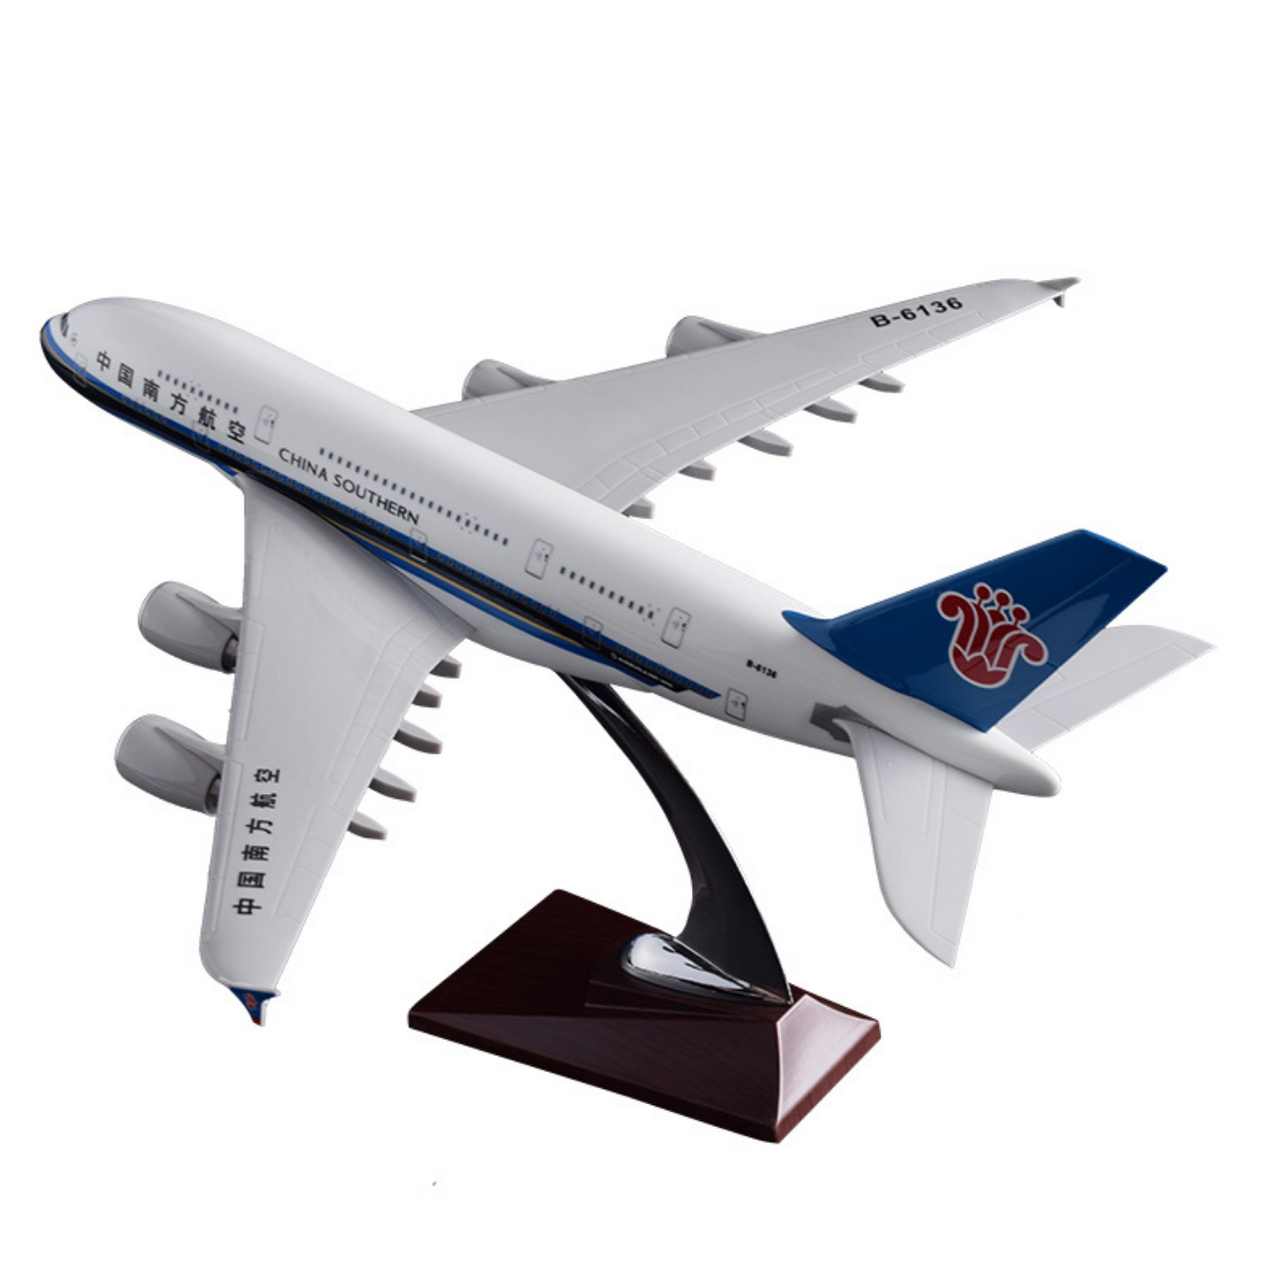 China Southern Airbus A380 Airplane Model (Handmade 45CM)